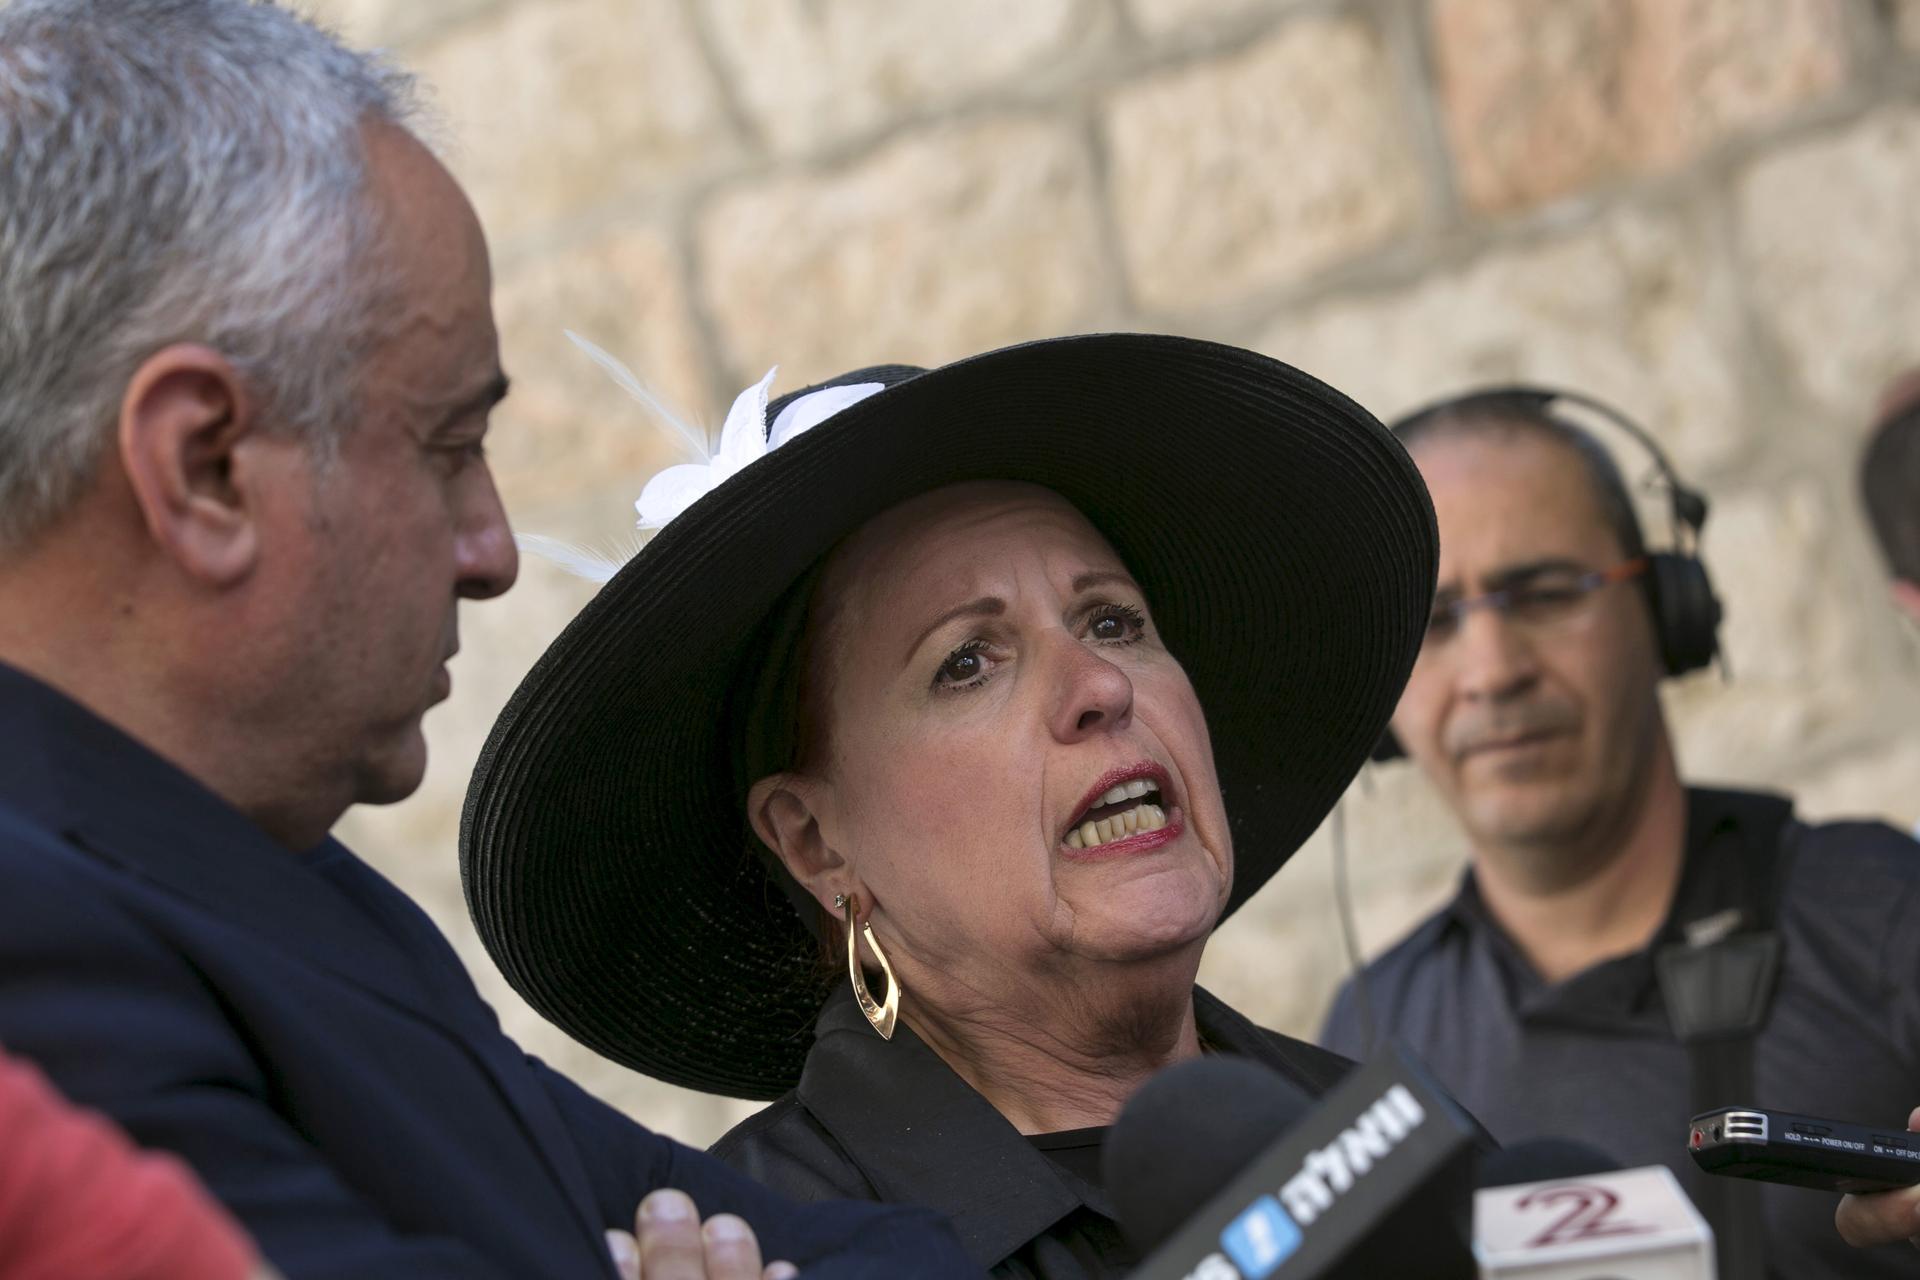 Jonathan Pollard's wife, Esther, holds a news conference in Jerusalem July 29, 2015. Israel offered a cautious welcome on Wednesday to the planned U.S. release of former spy Jonathan Pollard, wary that too warm a celebration might hurt efforts to persuade